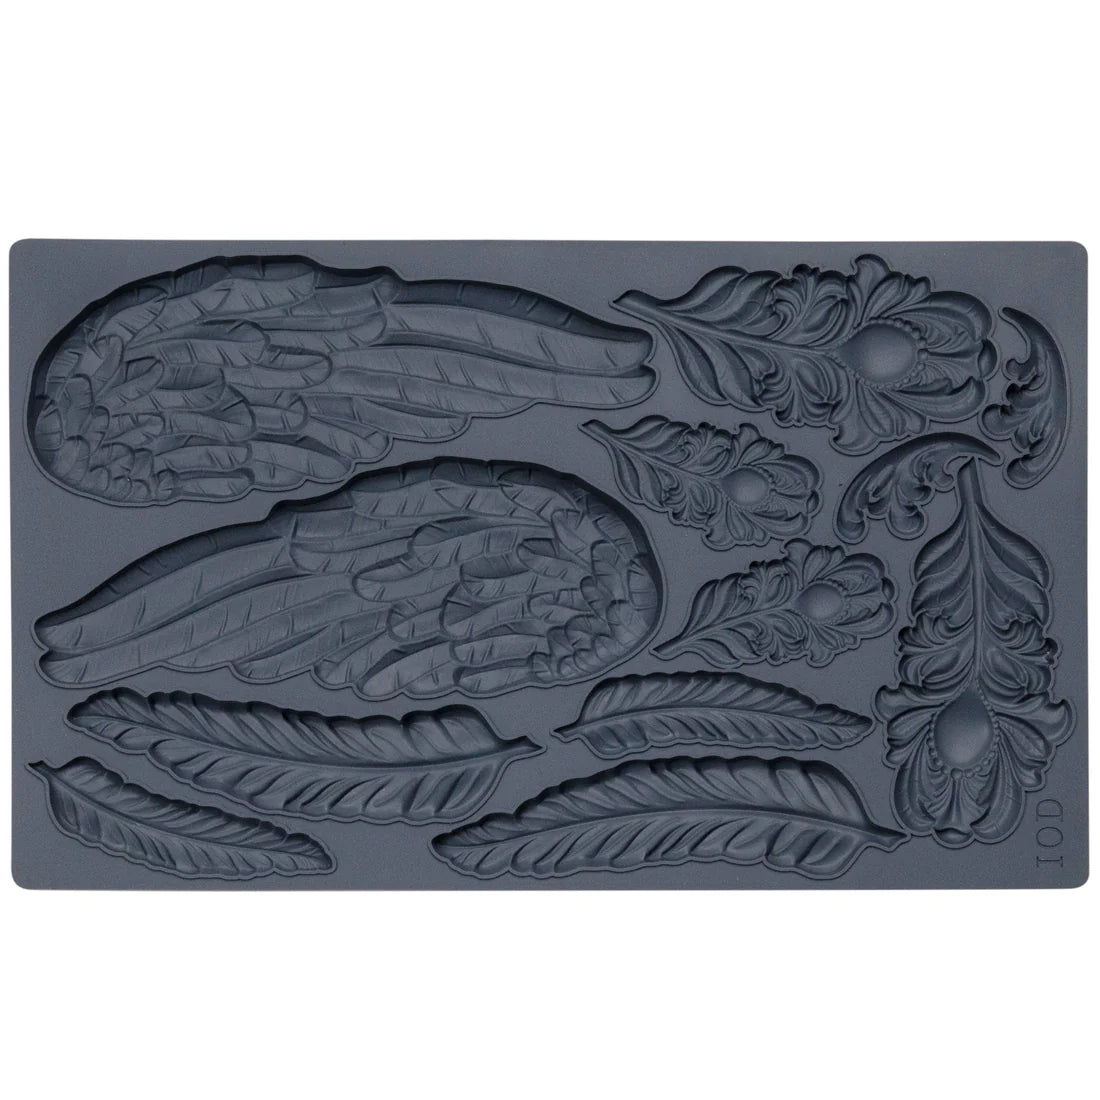 Wings & Feathers 6x10 IOD Mould